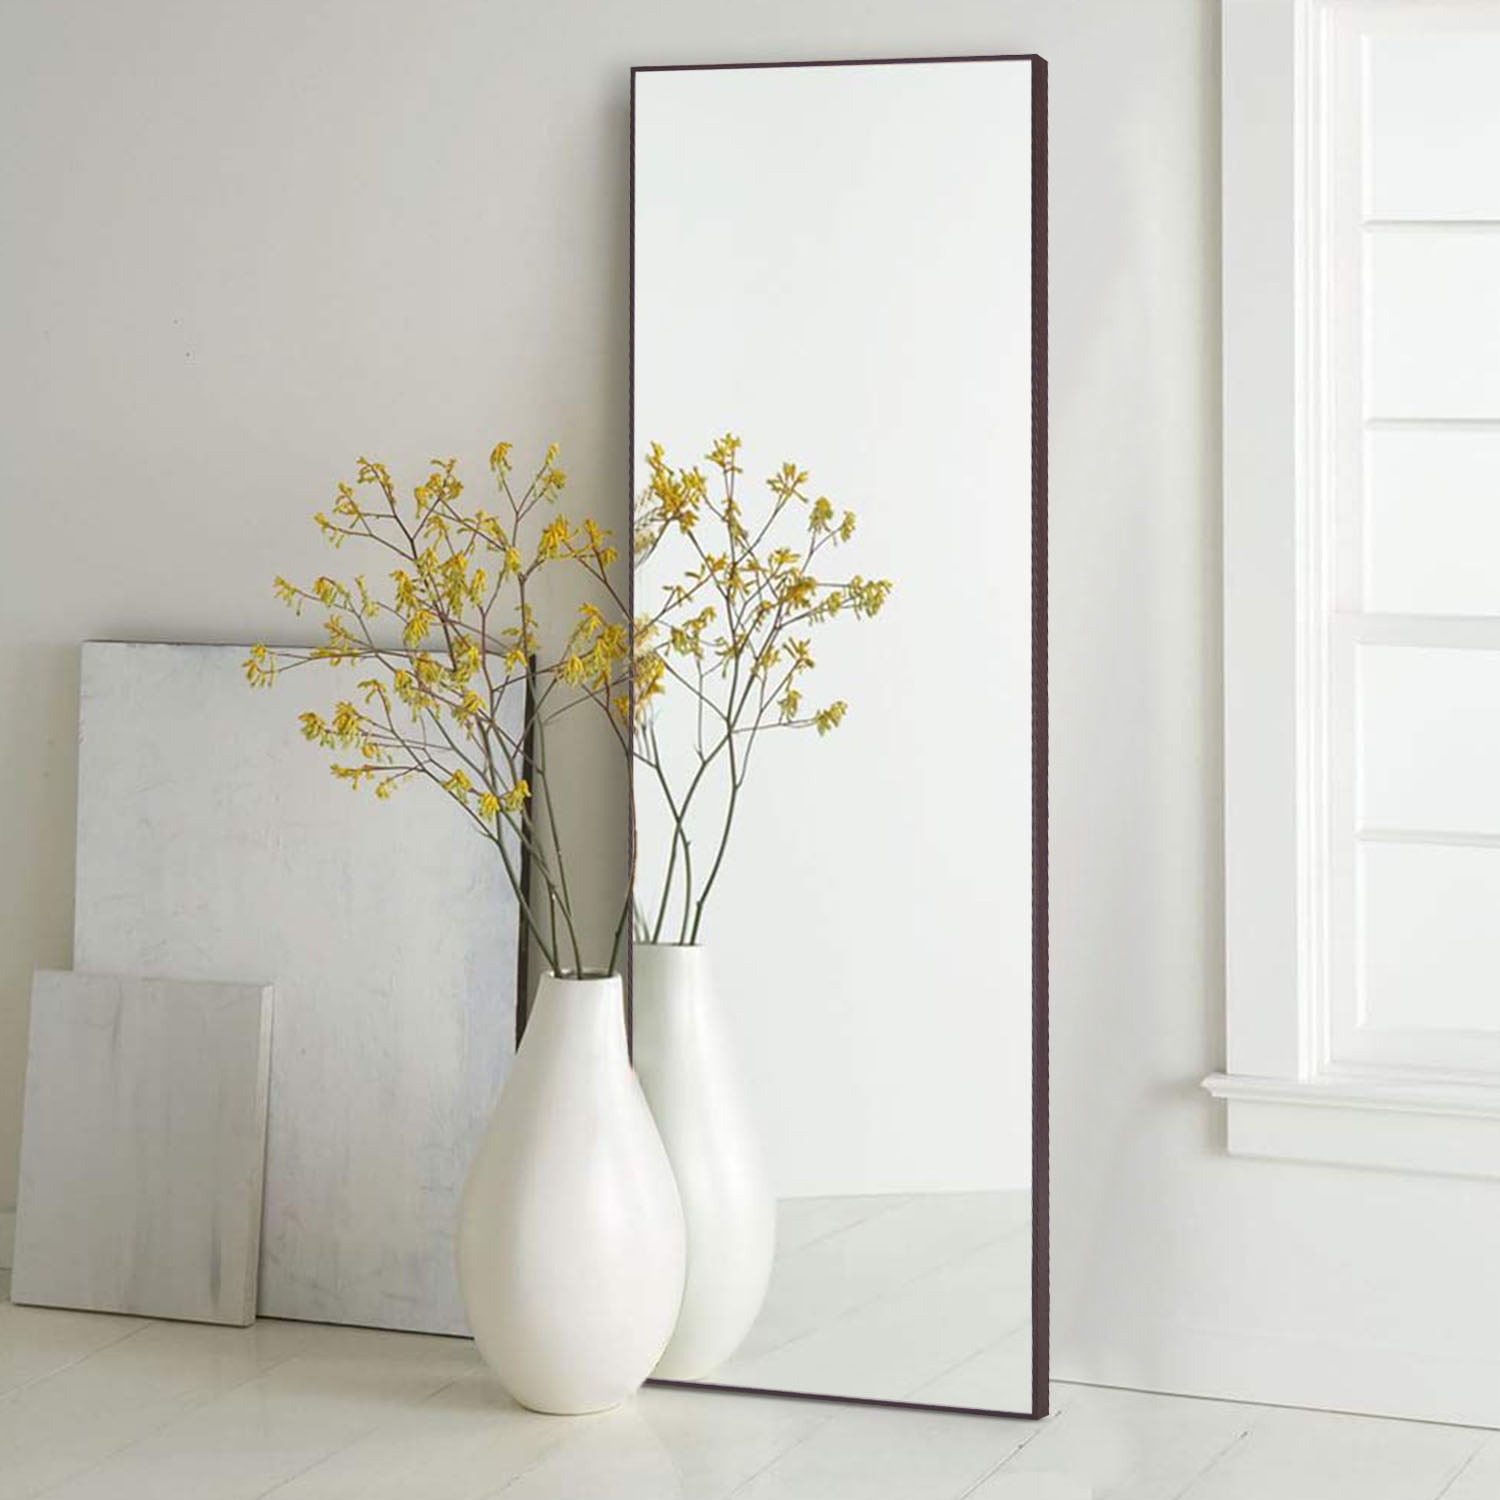 Black 59 x 20 with Standing ElevensMirror Full Length Mirror Dressing Mirror with Standing Holder 59x20 Large Rectangle Bedroom Floor Mirror Wall-Mounted Mirror Hanging Leaning 